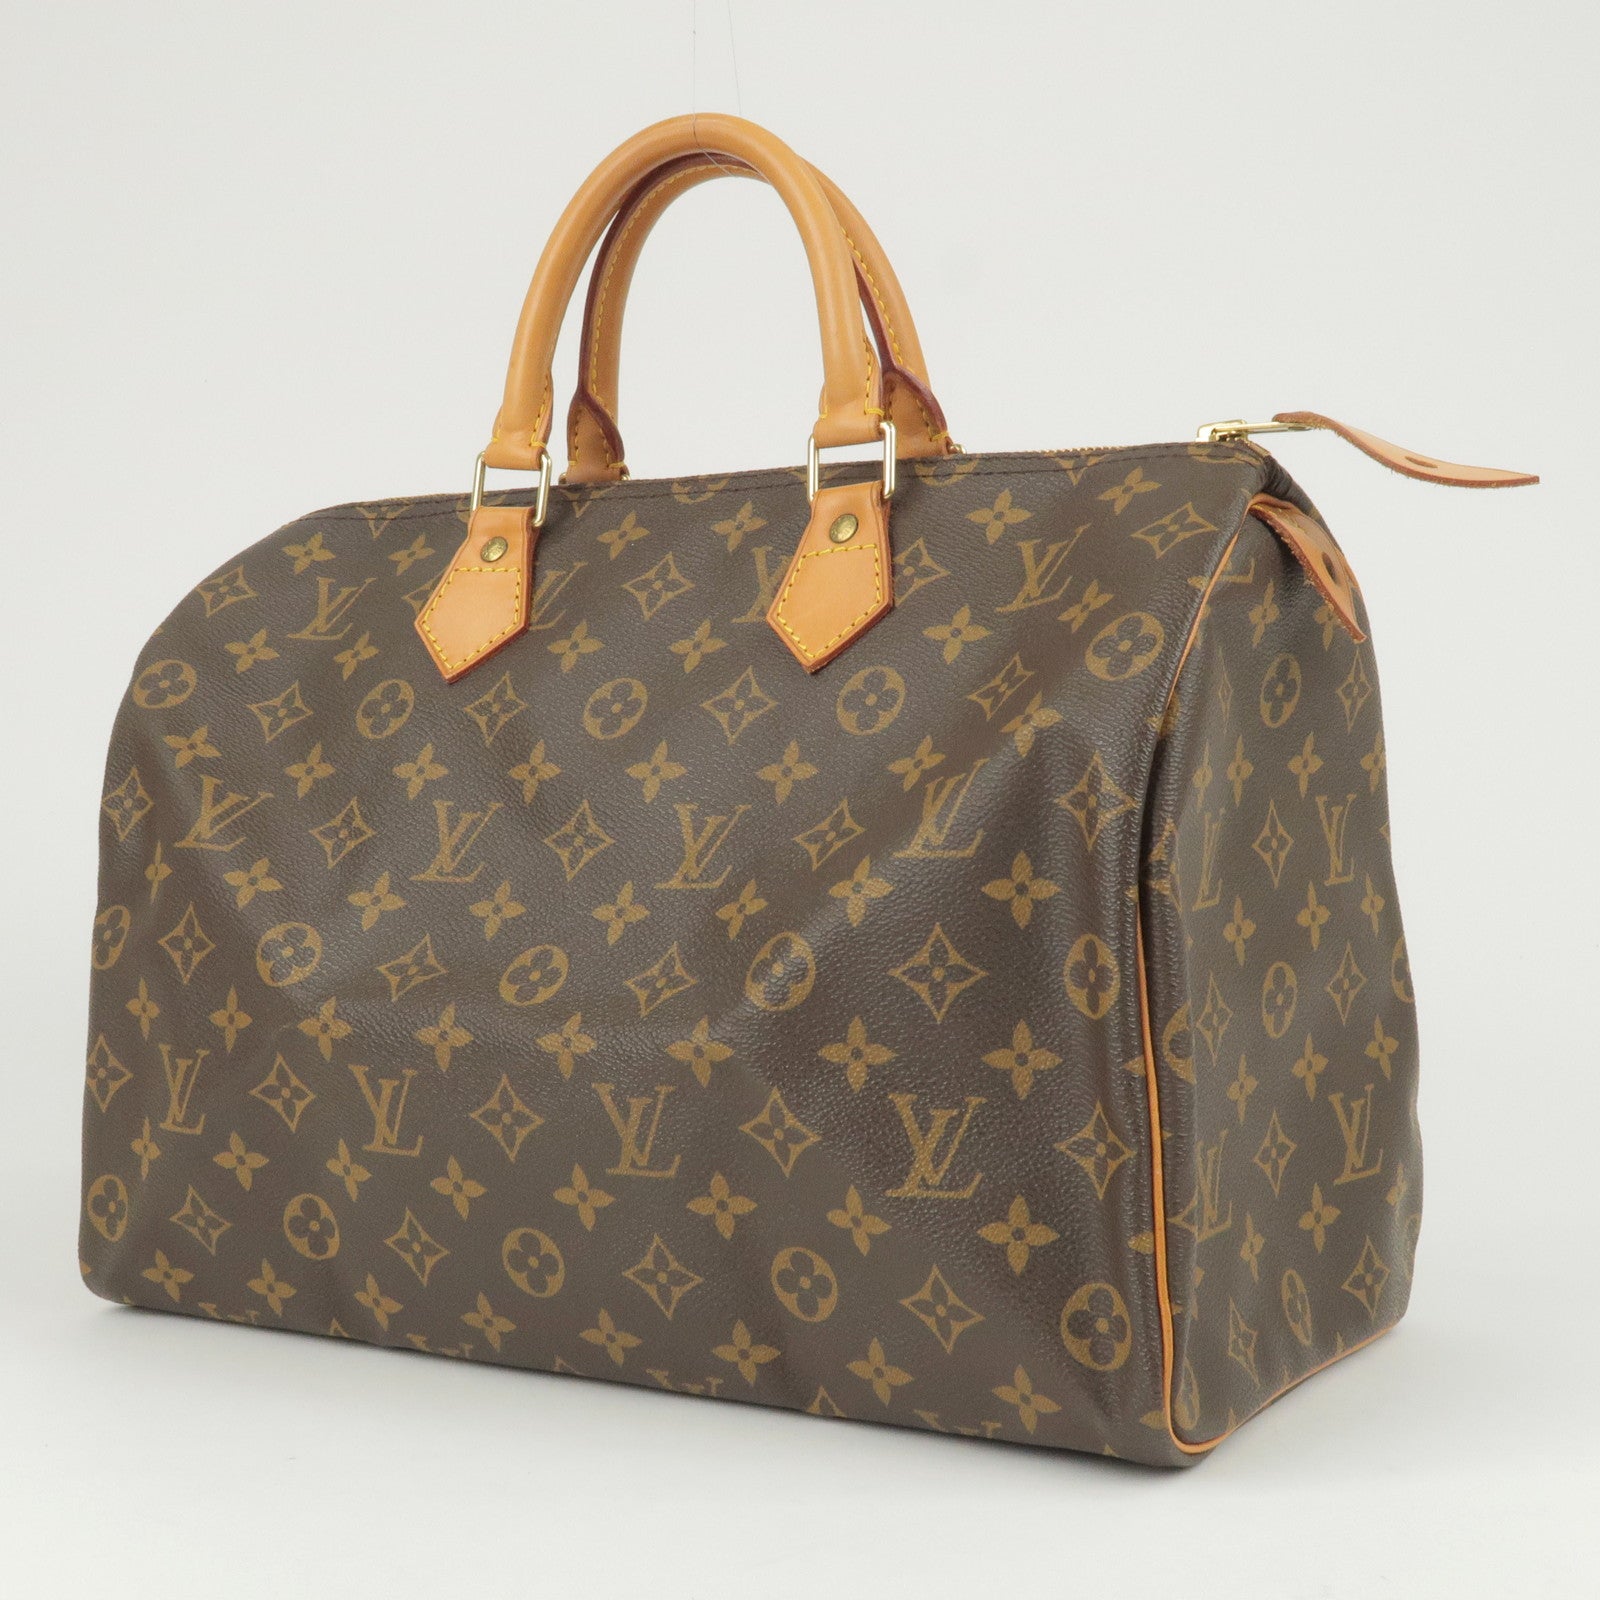 Pre-owned Louis Vuitton 2001 Speedy 35 Tote Bag In Brown